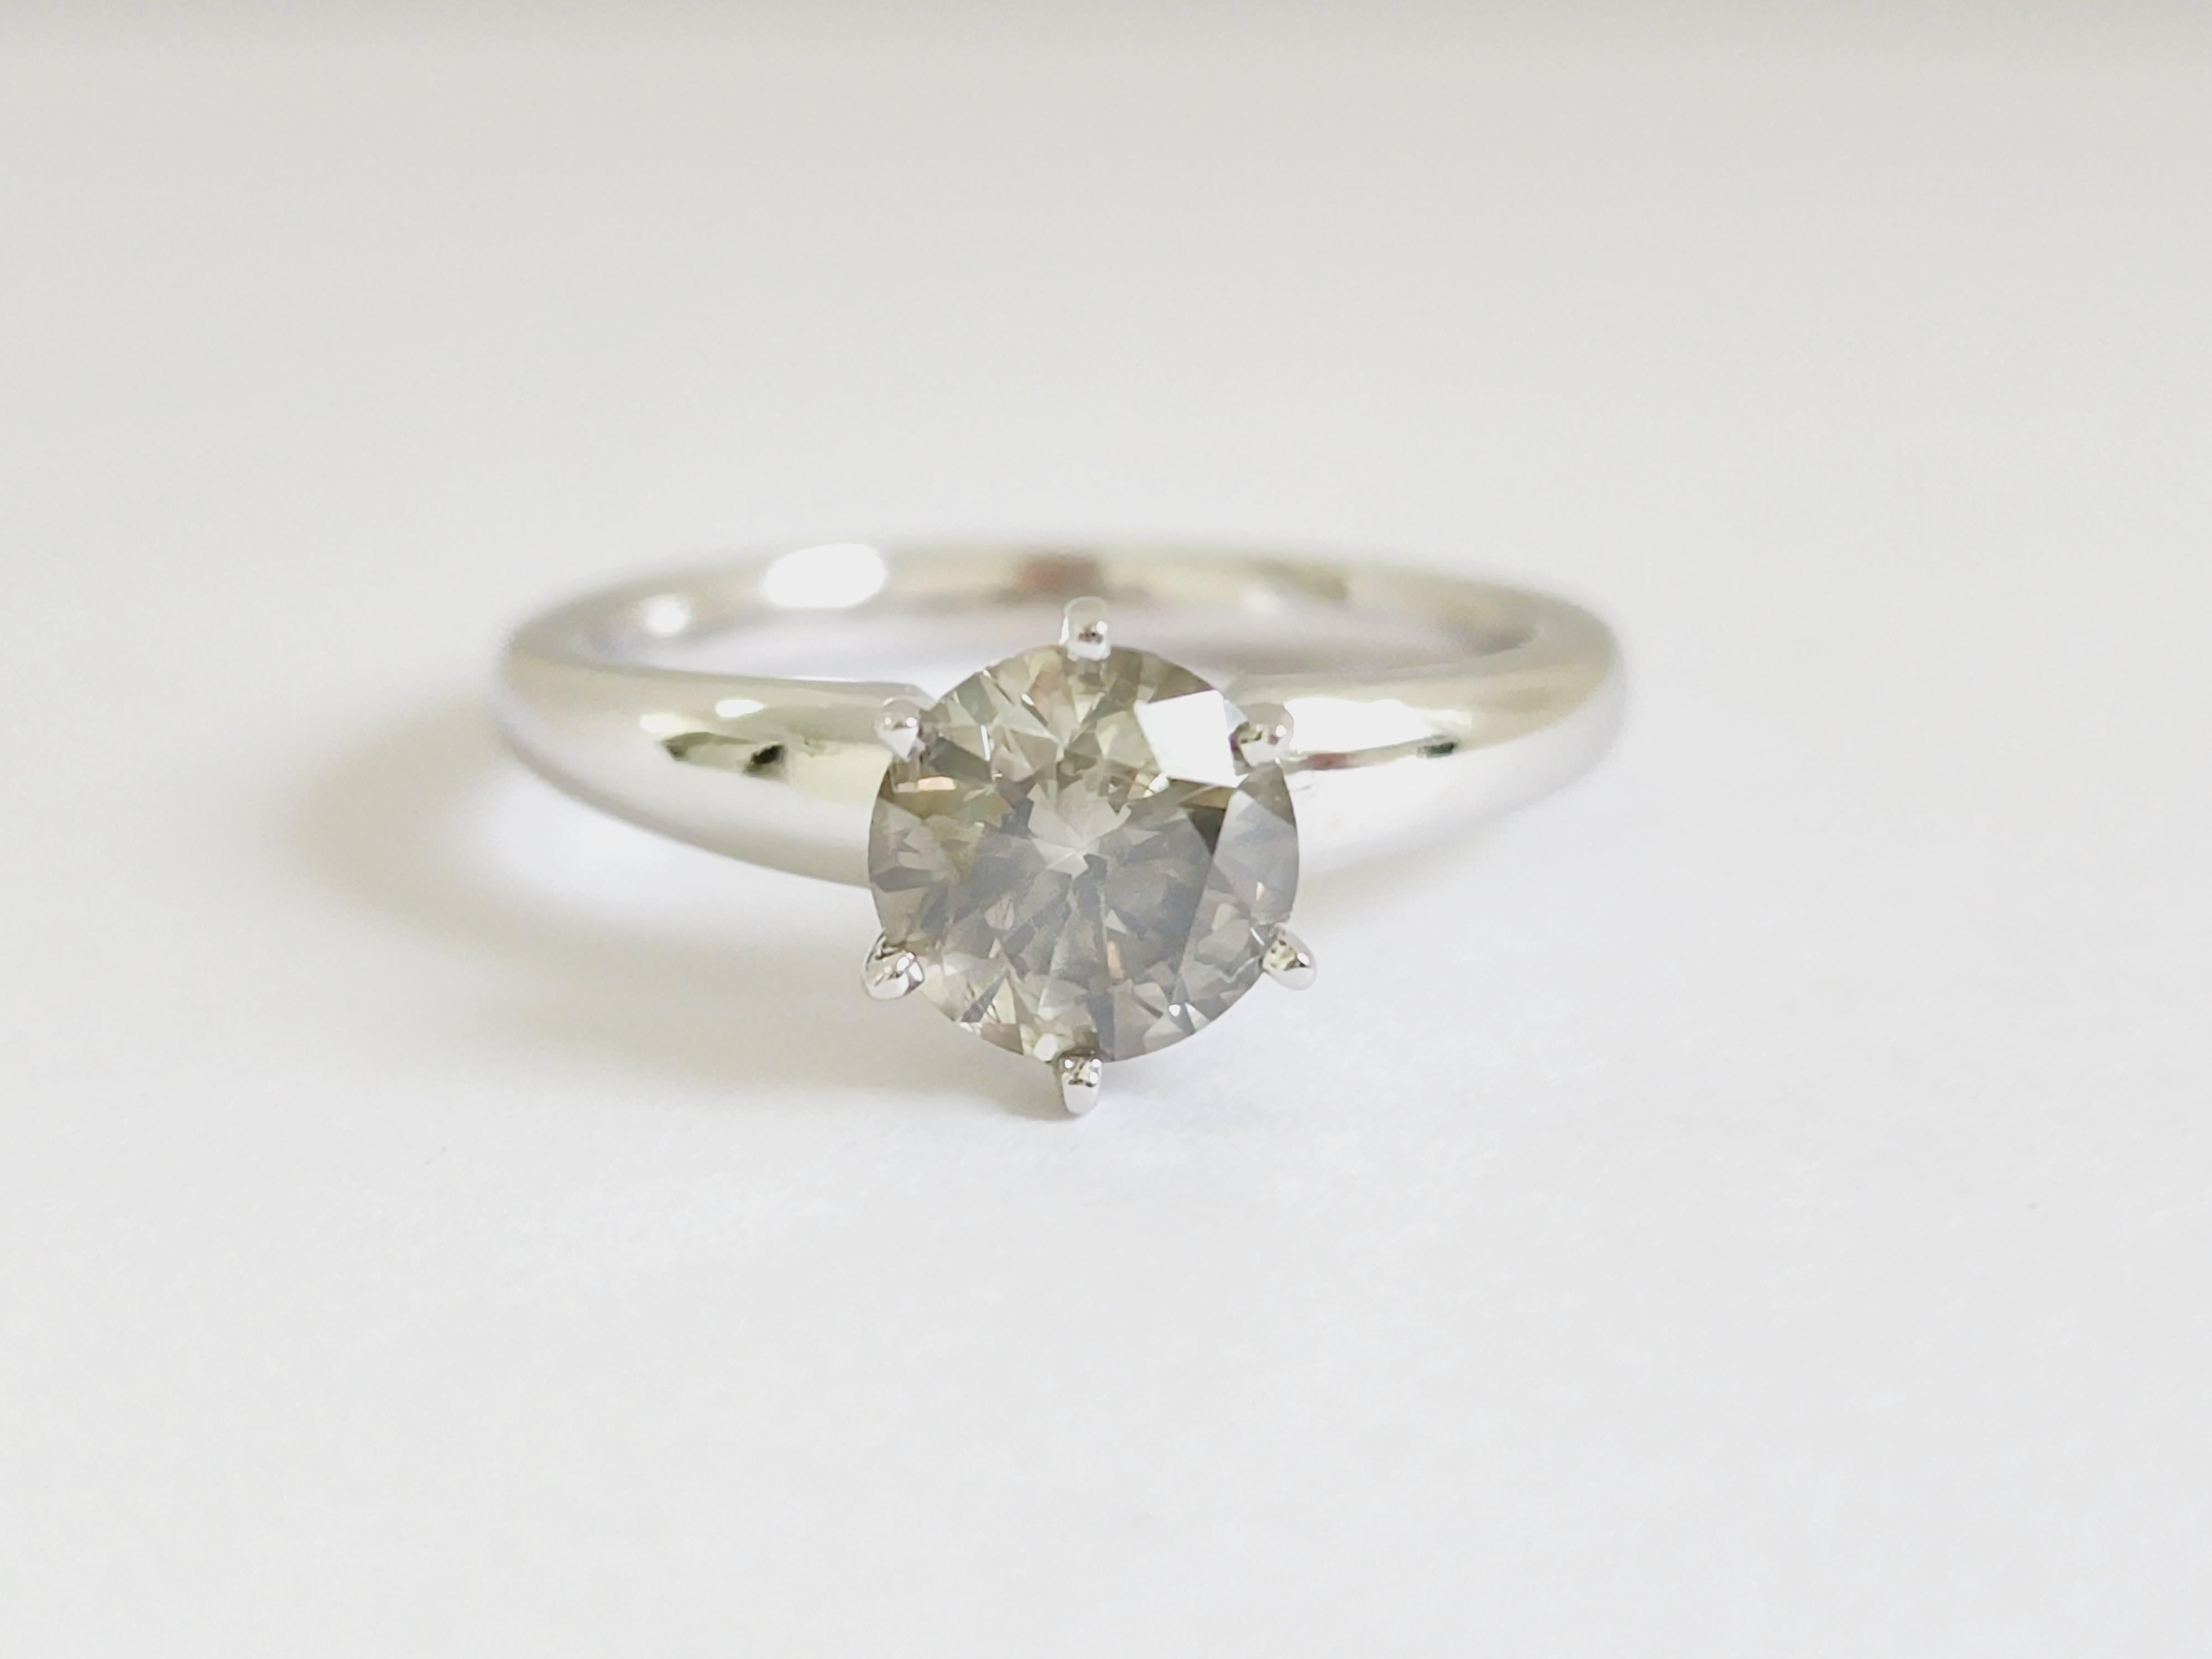 1.29 Carats round diamond set on a 6 prong white gold 14 Karat solitaire Ring. 
Natural Greenish Gray, Si1
Ring Size 7 